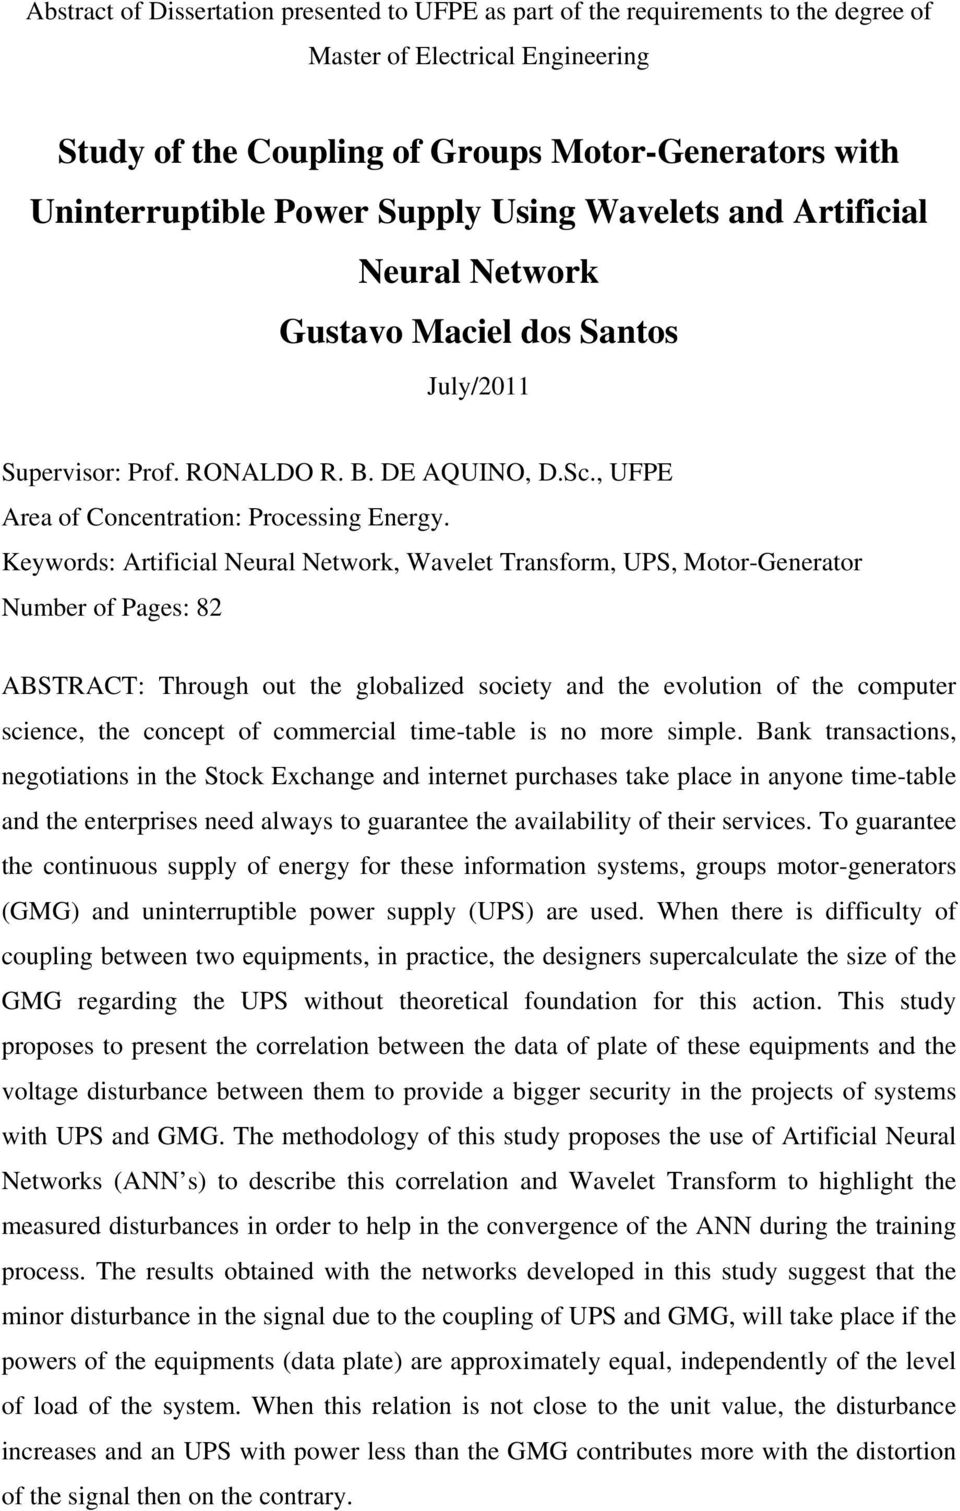 Keywords: Artifiial Neural Network, Wavelet Transform, UPS, Motor-Generator Number of Pages: 82 ABSTRACT: Through out the globalized soiety and the evolution of the omputer siene, the onept of